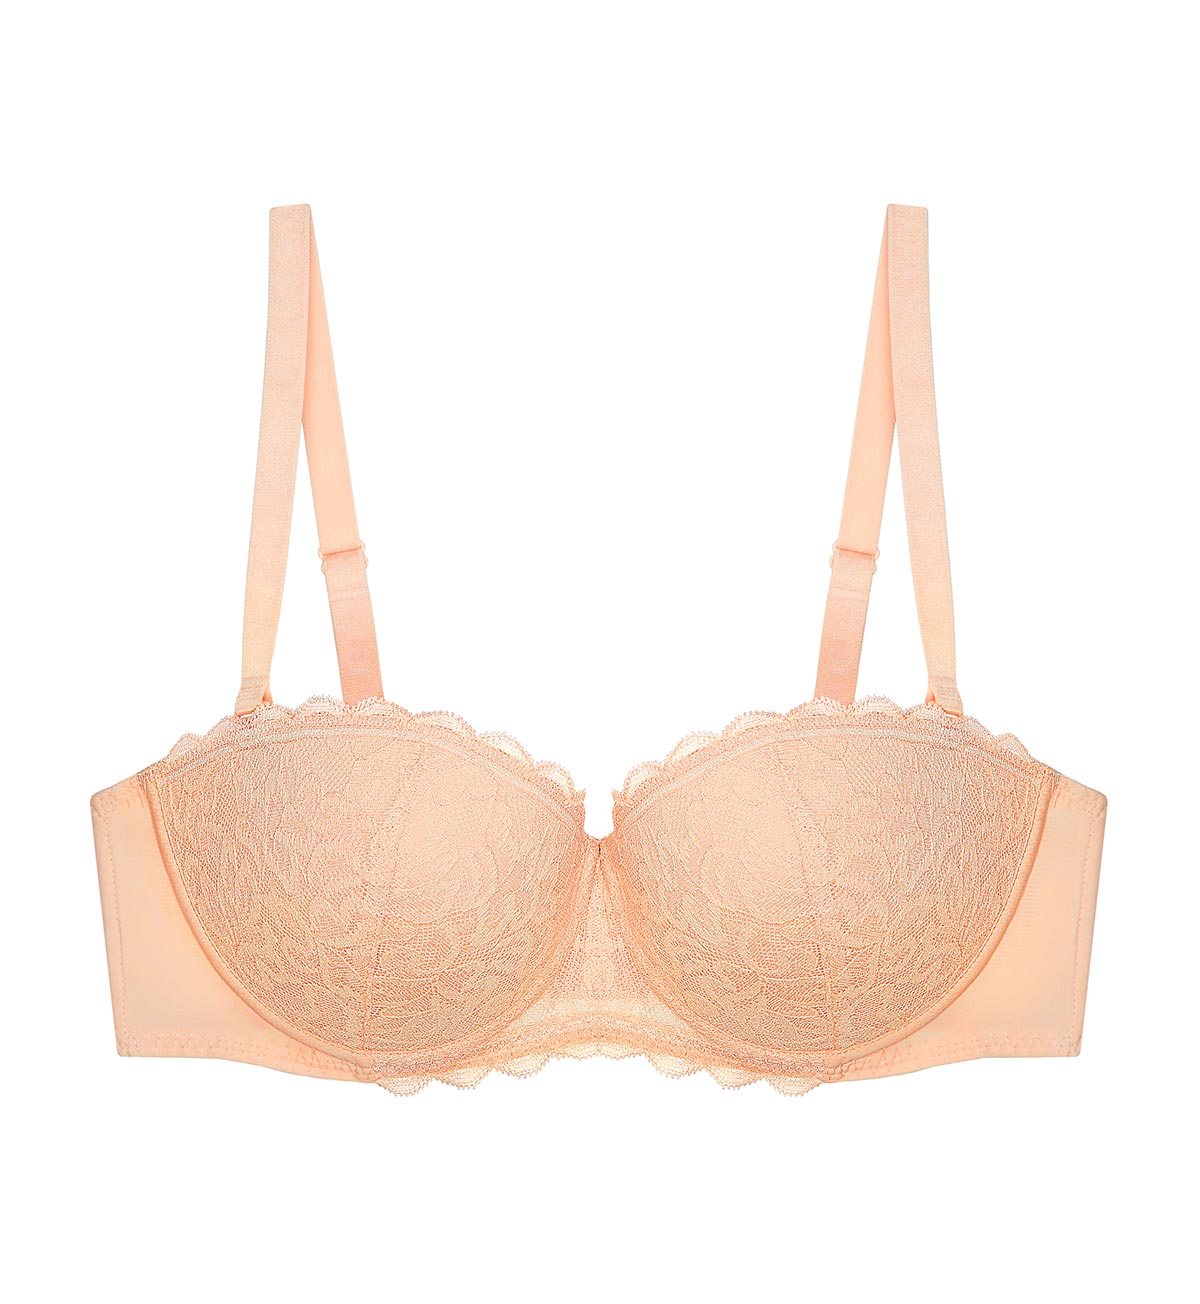 Simply Fashion Blossom Wired Padded Detachable Bra in Orange Highlight